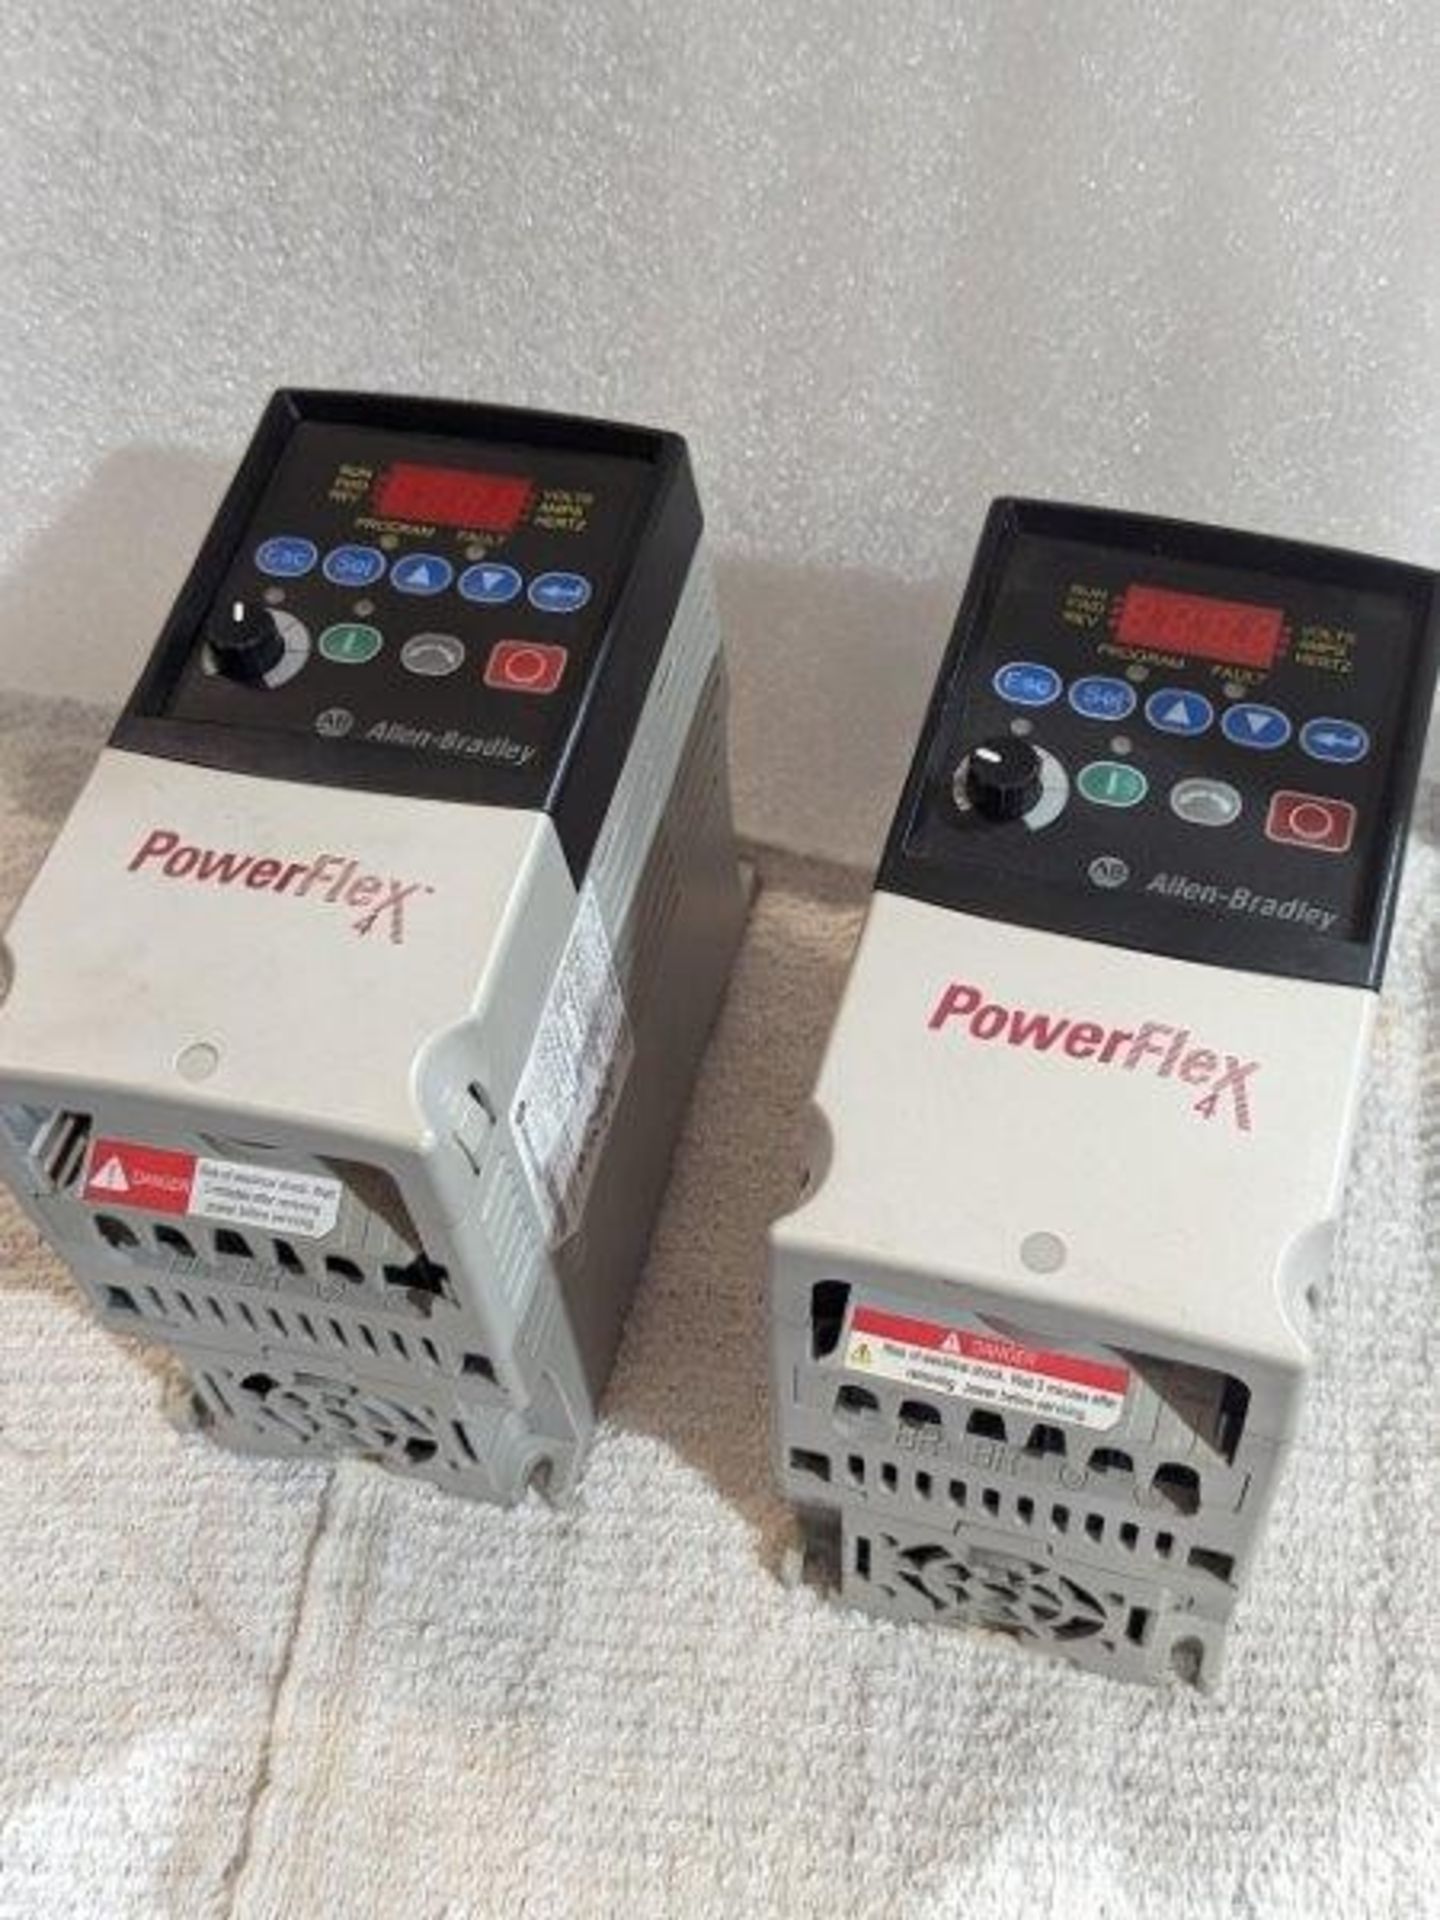 ALLEN-BRADLEY PowerFlex 4 Variable Frequency Drives (Lot of 2); 0.5 HP; CAT 22A-D1P4N104 Ser A ( - Image 2 of 5